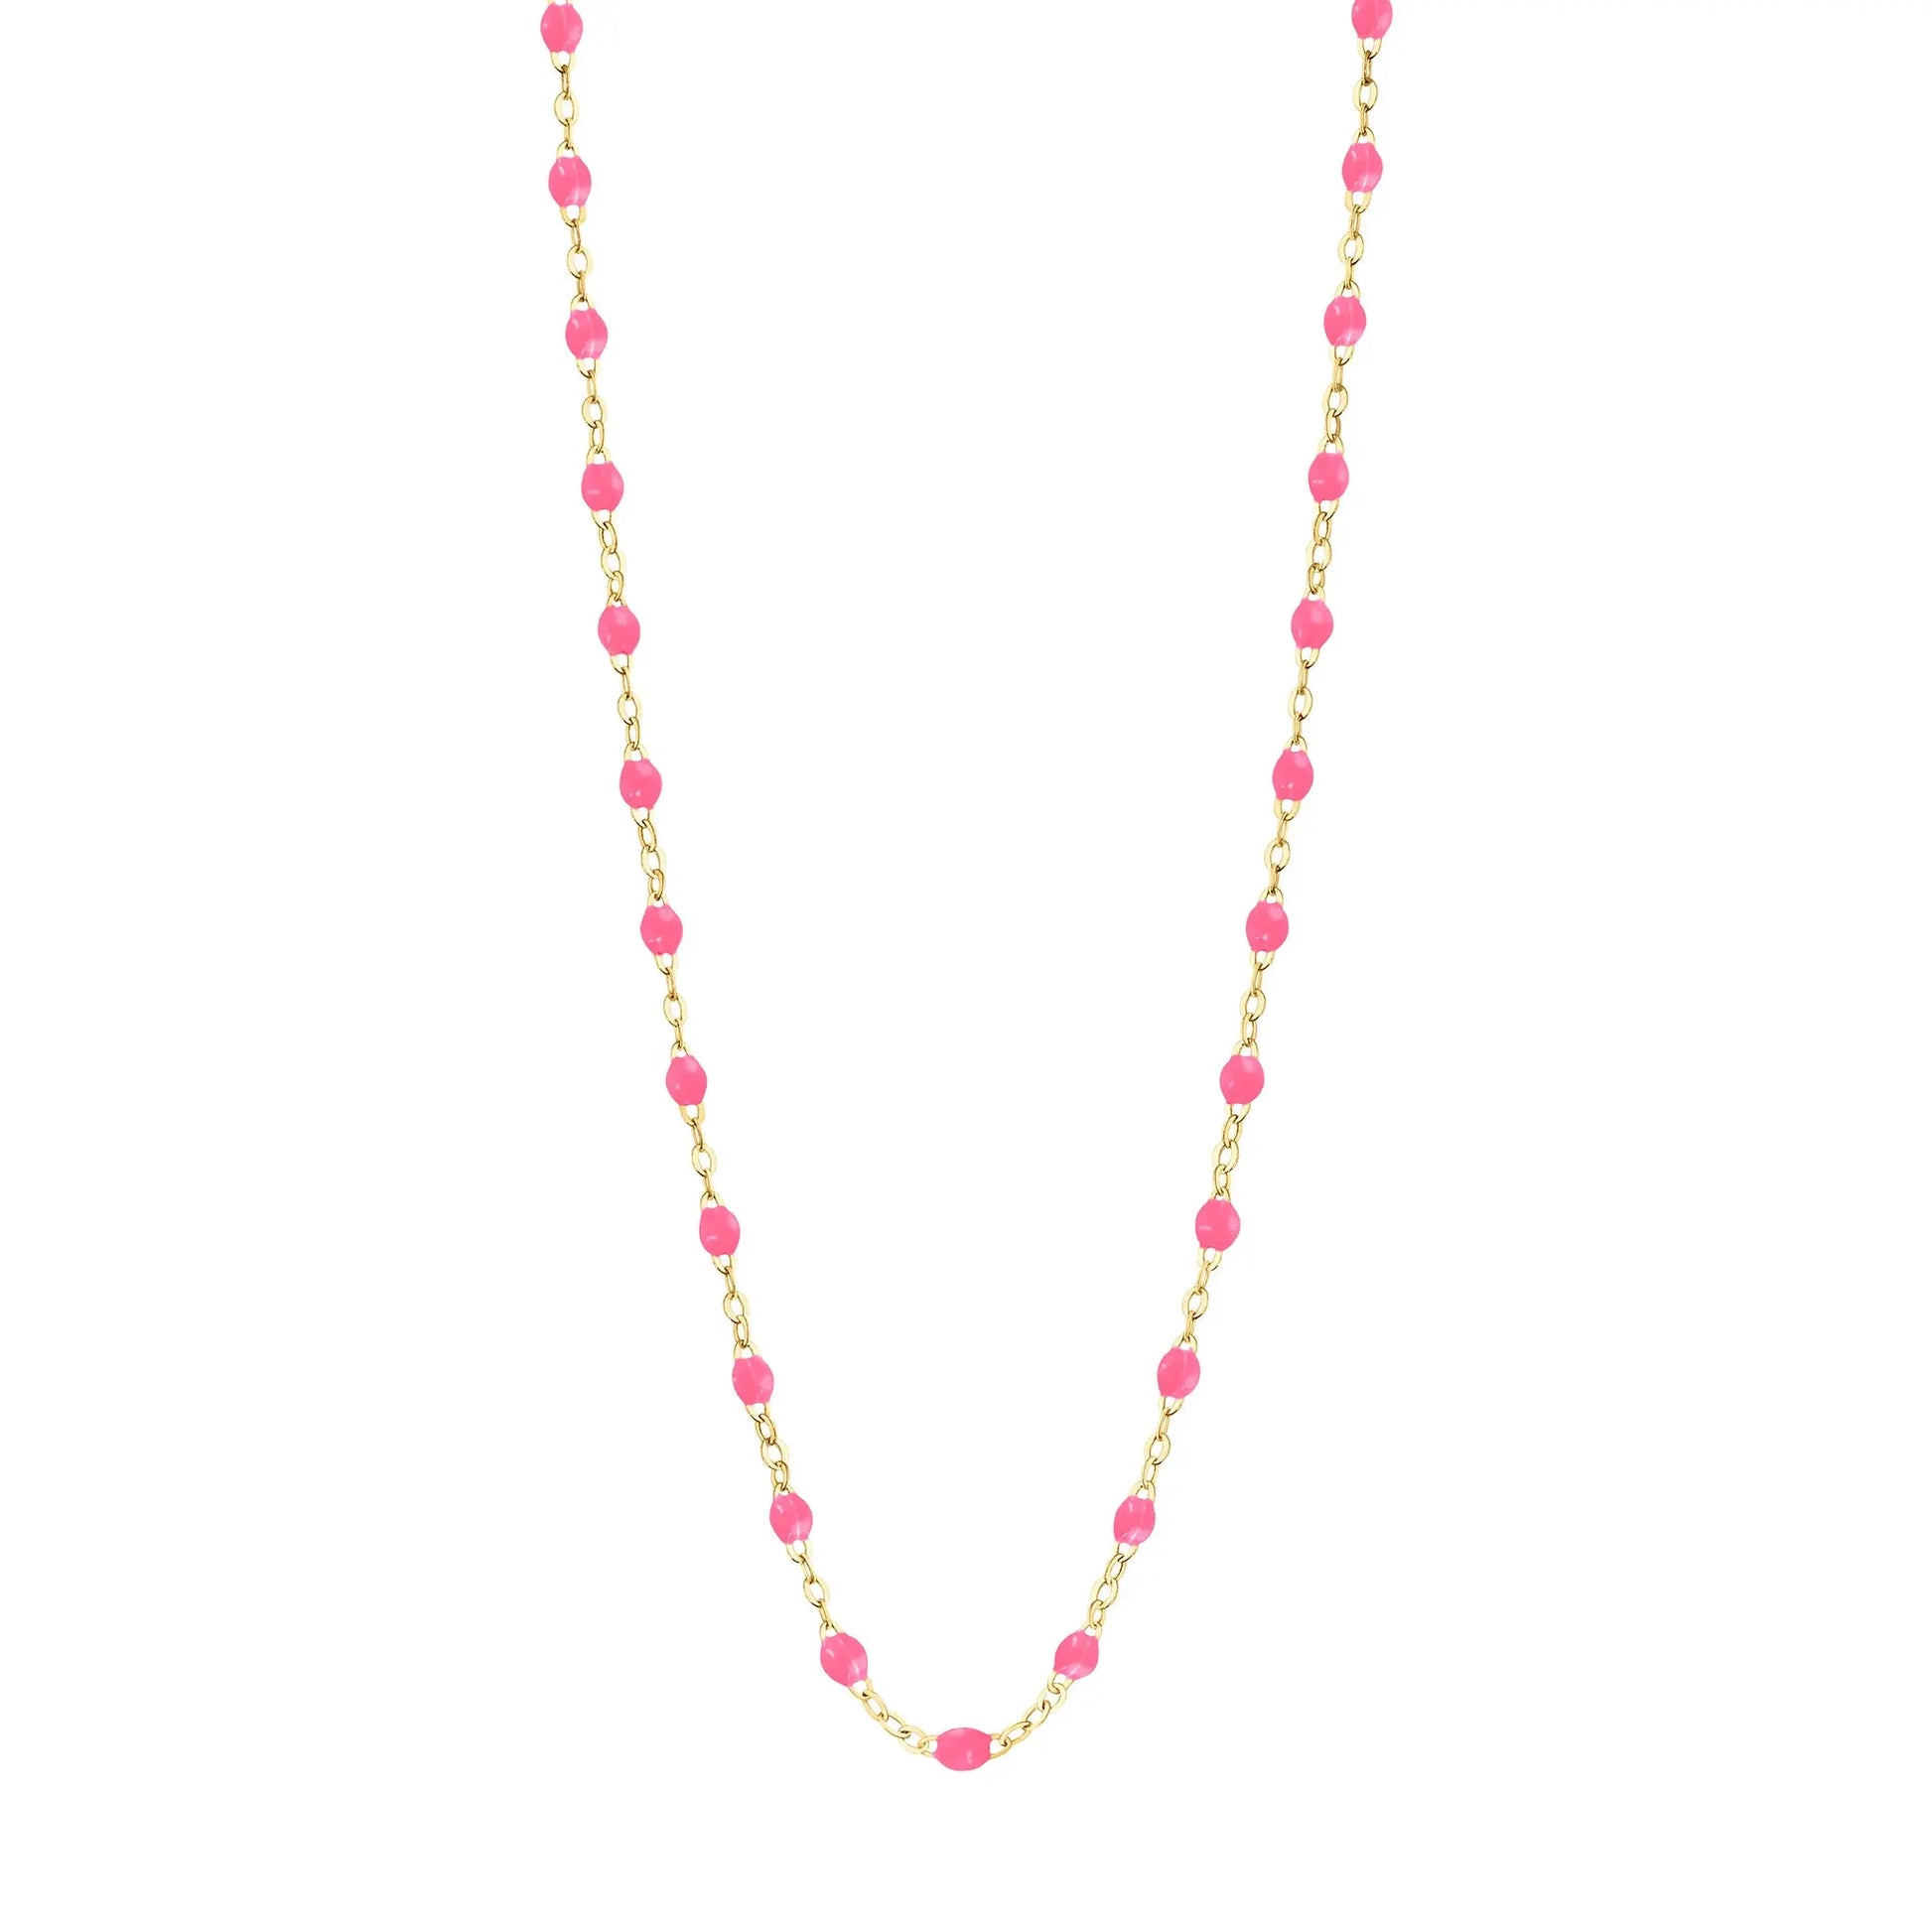 Stack you necklace layers with this versatile beaded chain! The Classic Gigi Necklace by gigi CLOZEAU features 18 carat yellow gold, and striking Pink resin jewels for an everyday effortless appearance. Handcrafted in 18k yellow gold. The beads measure 1.50mm in diameter and is finished with a spring ring clasp. The length is 19.7 inches.